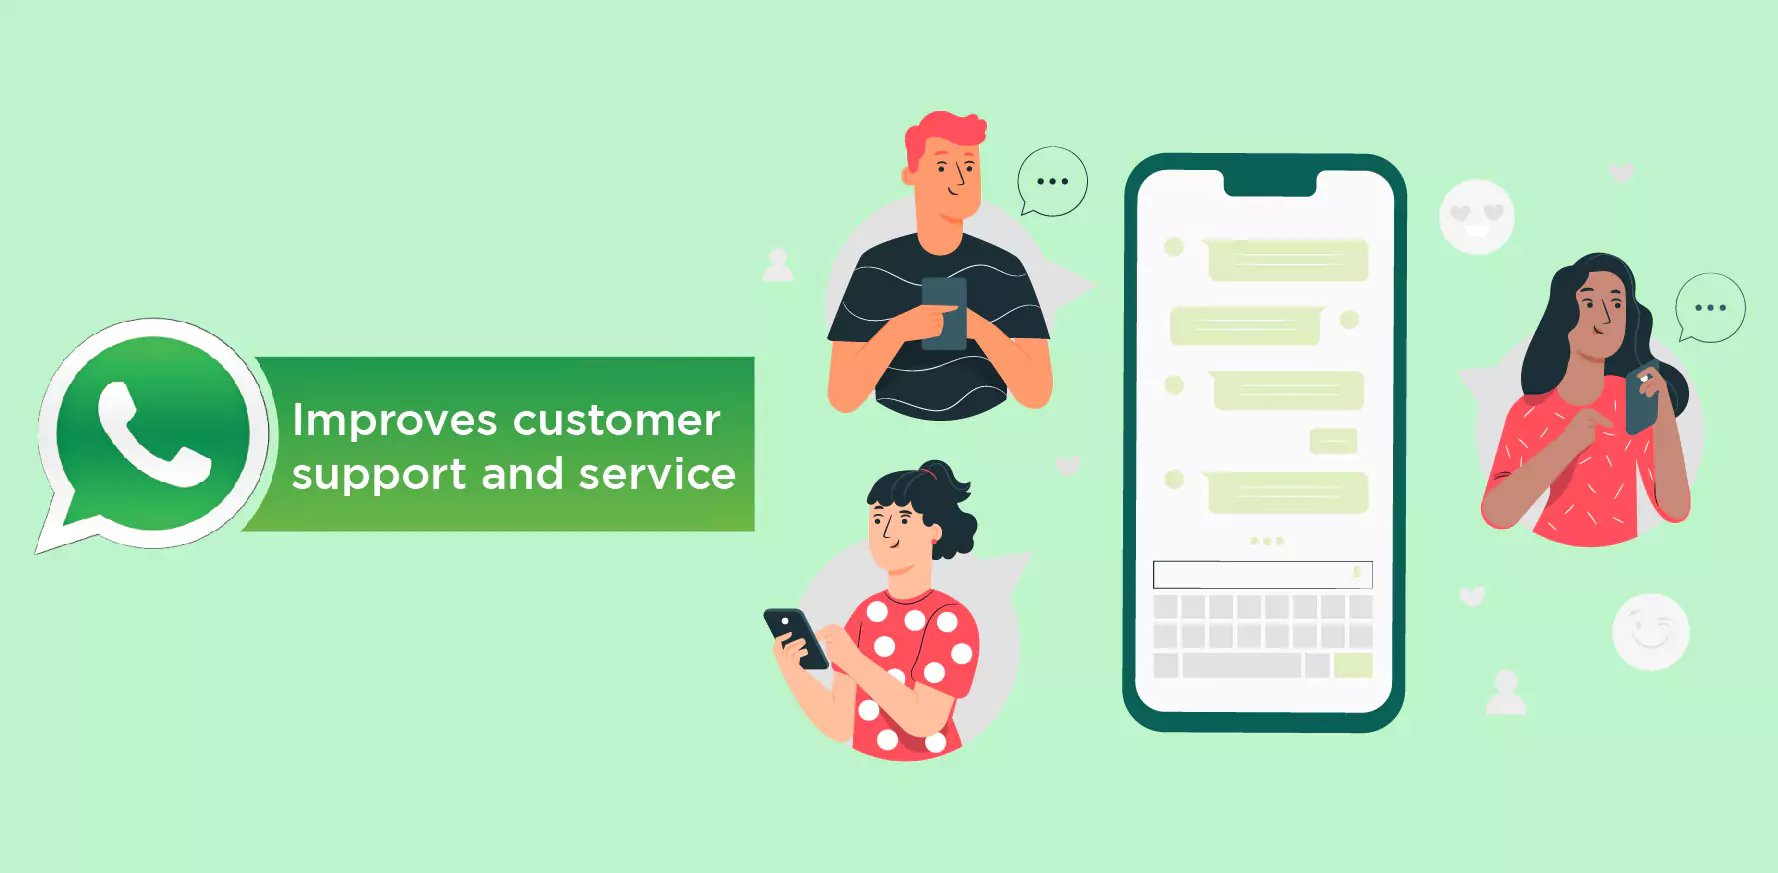  WhatsApp Bot improves customer support and service